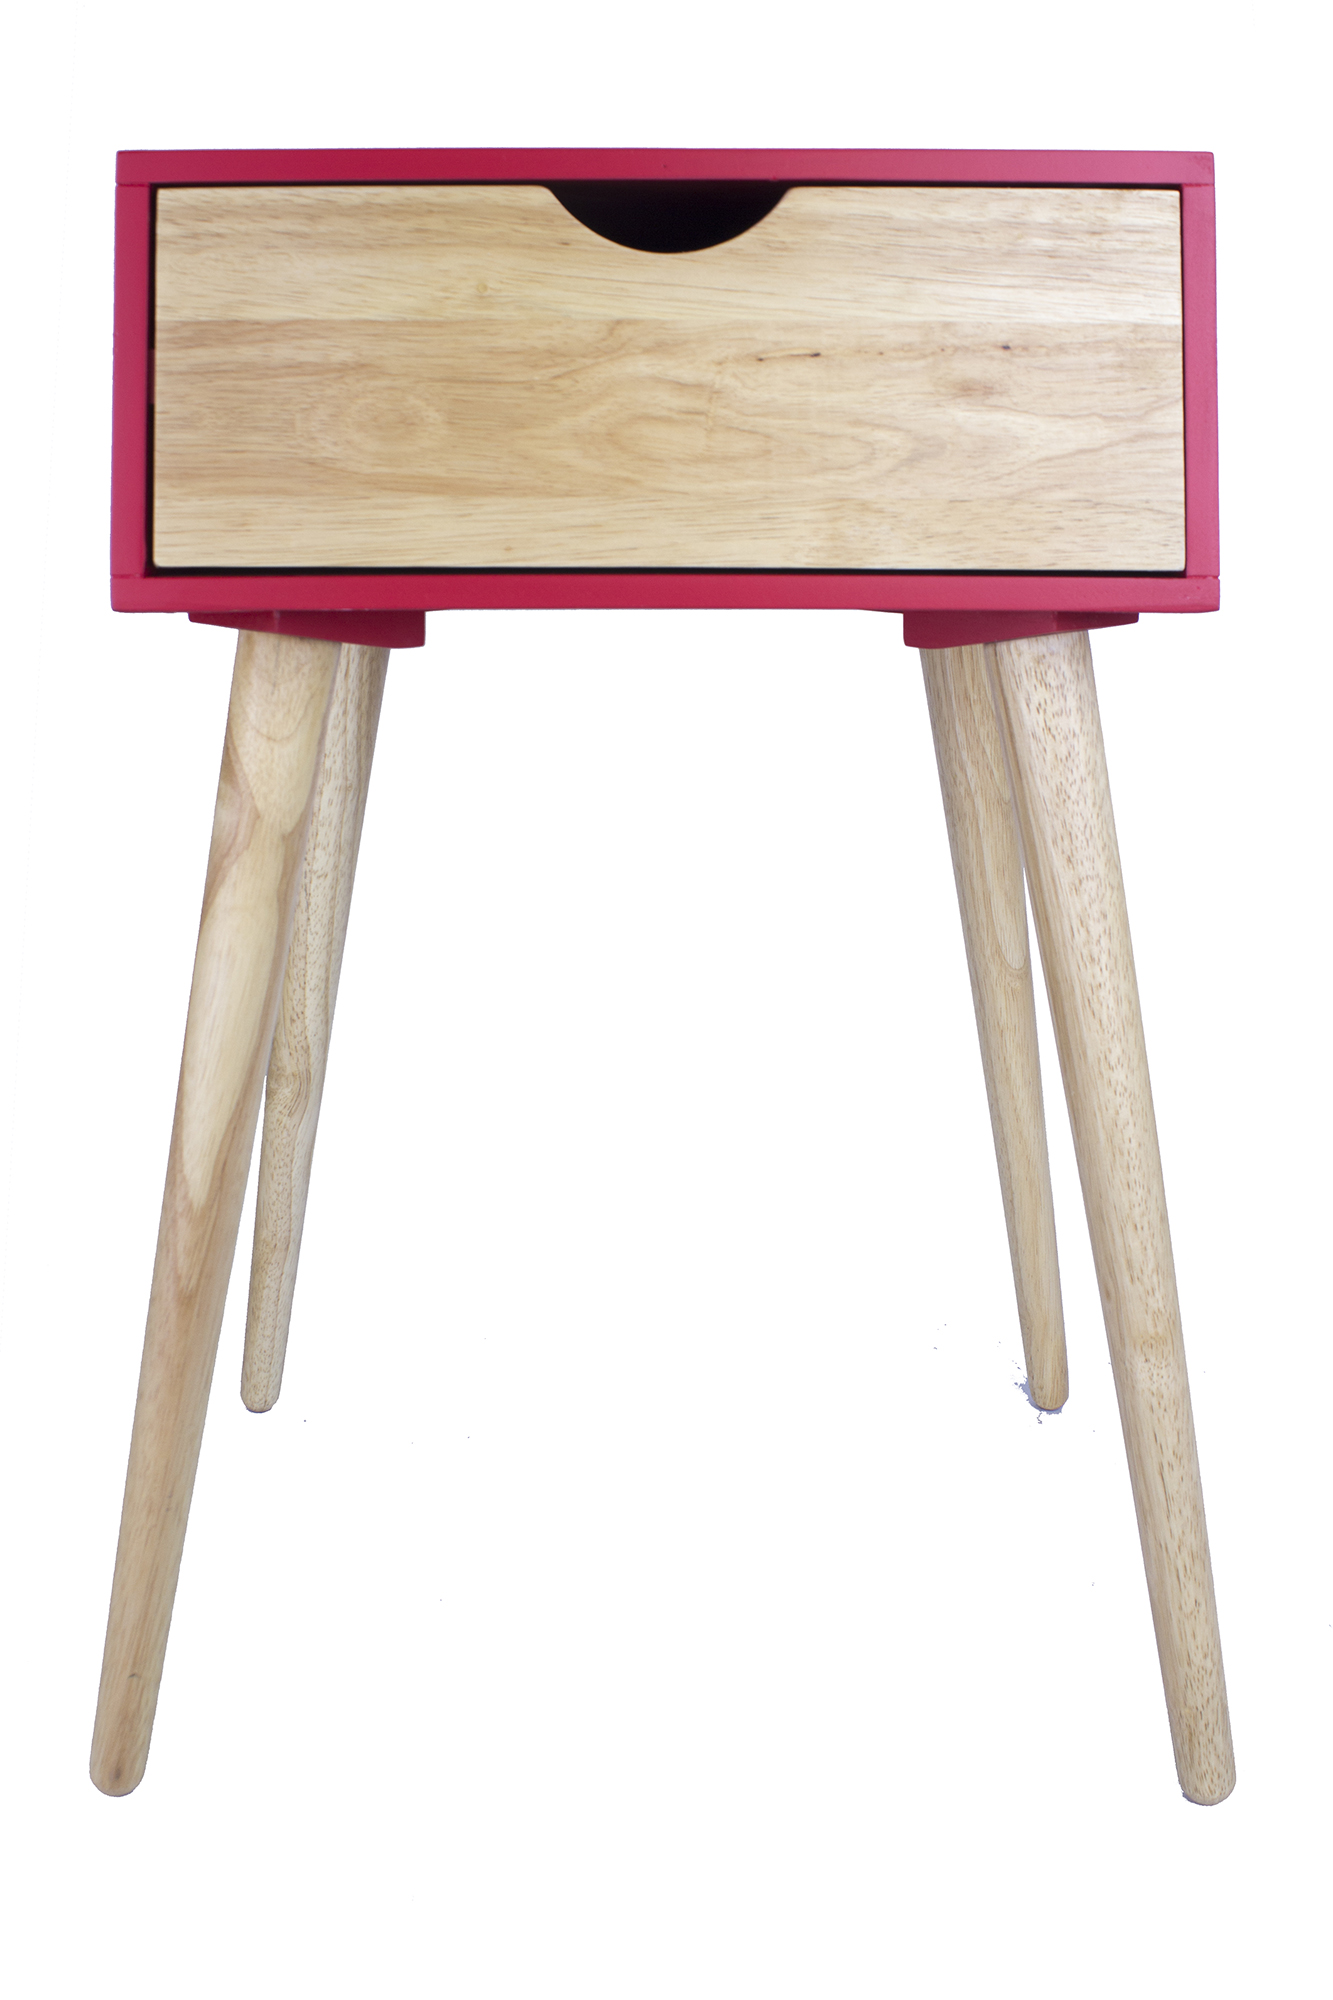 16" X 12" X 24" Red MDF Wood End Table with Drawer